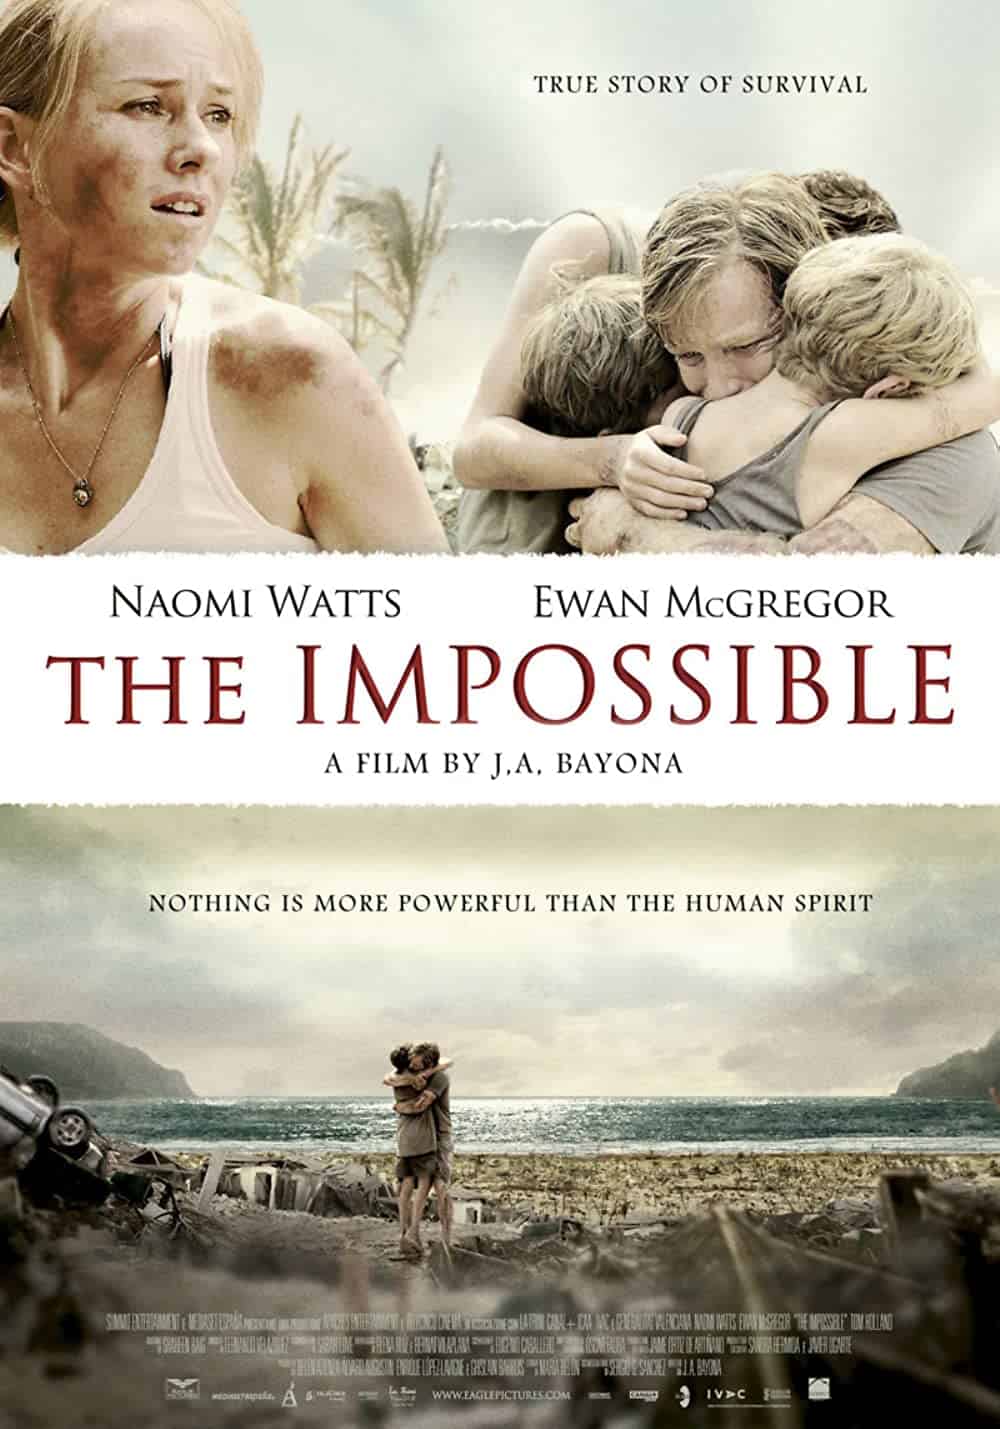 The Impossible (2012) 15 Best Nature Movies to Add in Your Watchlist